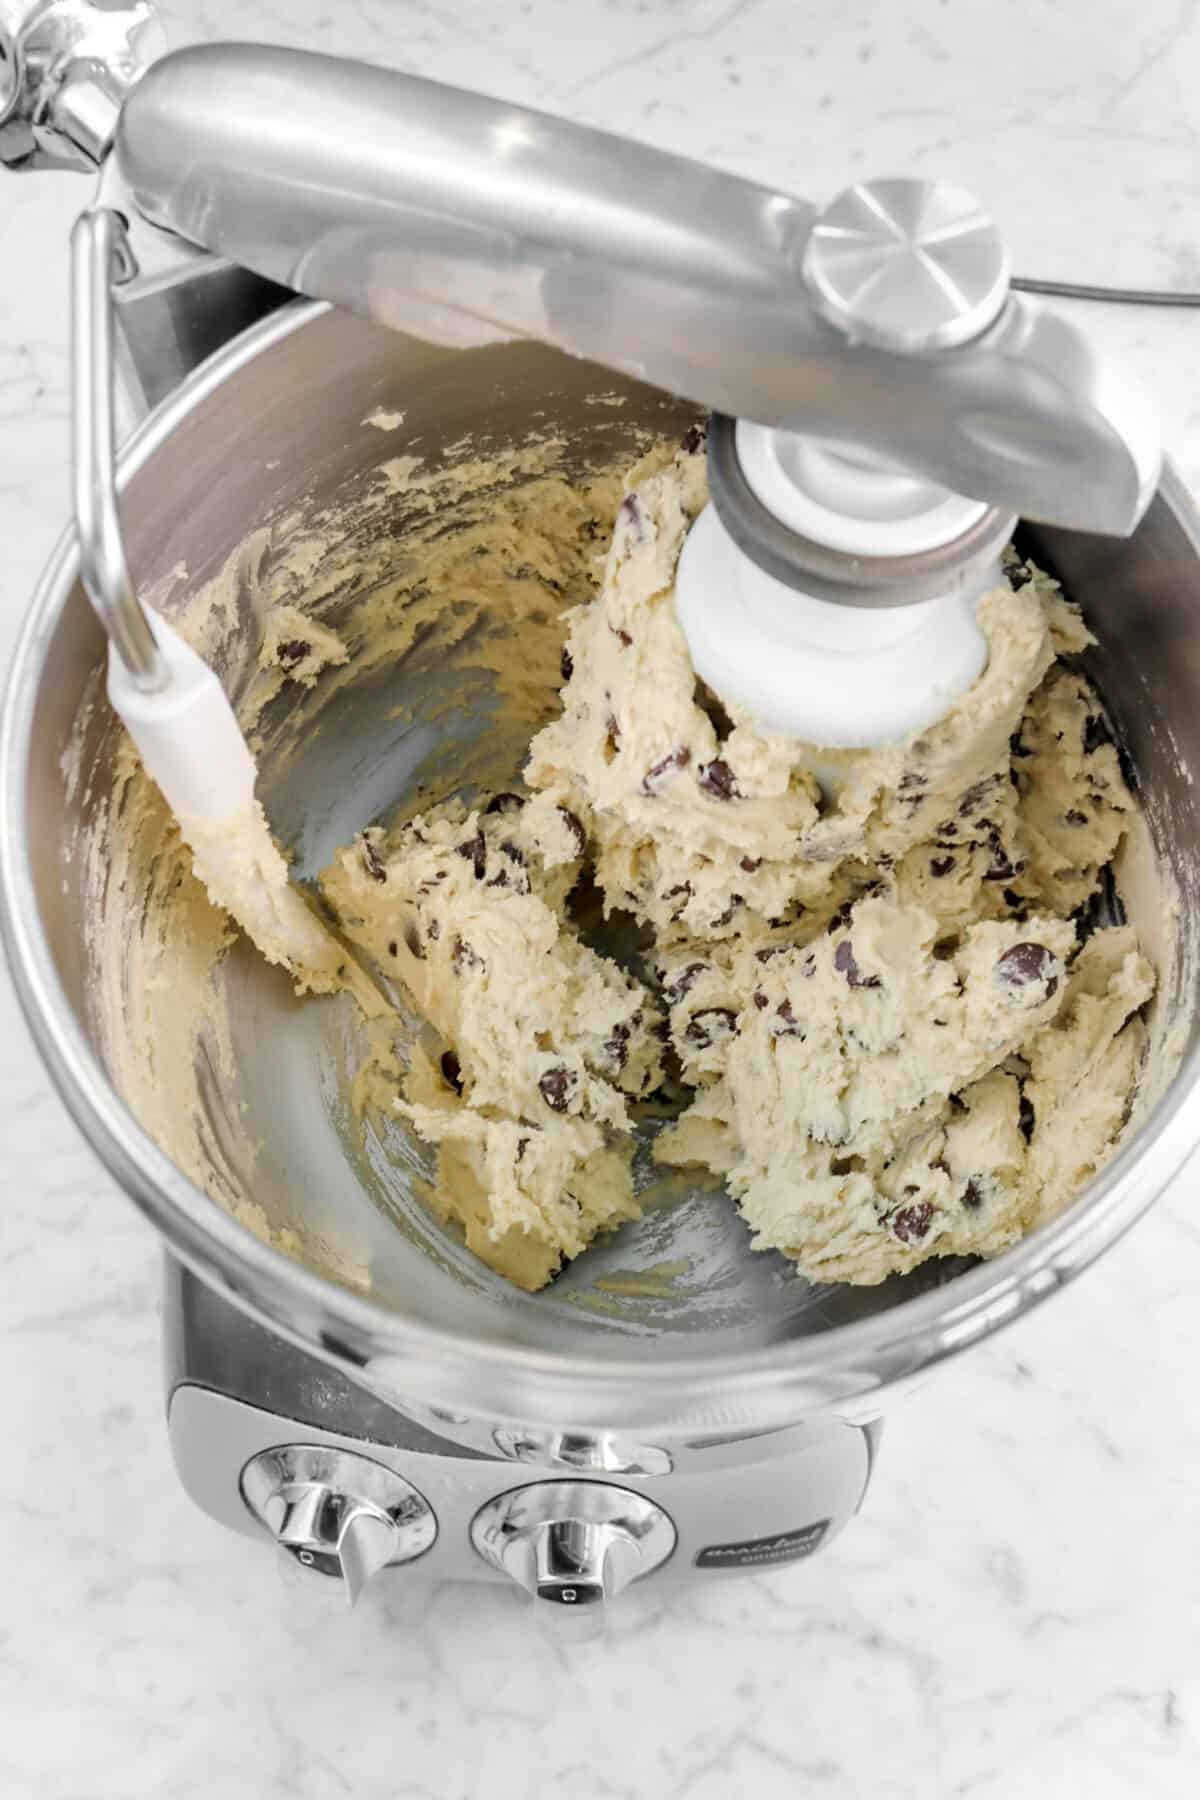 chocolate chips stirred into the cookie dough